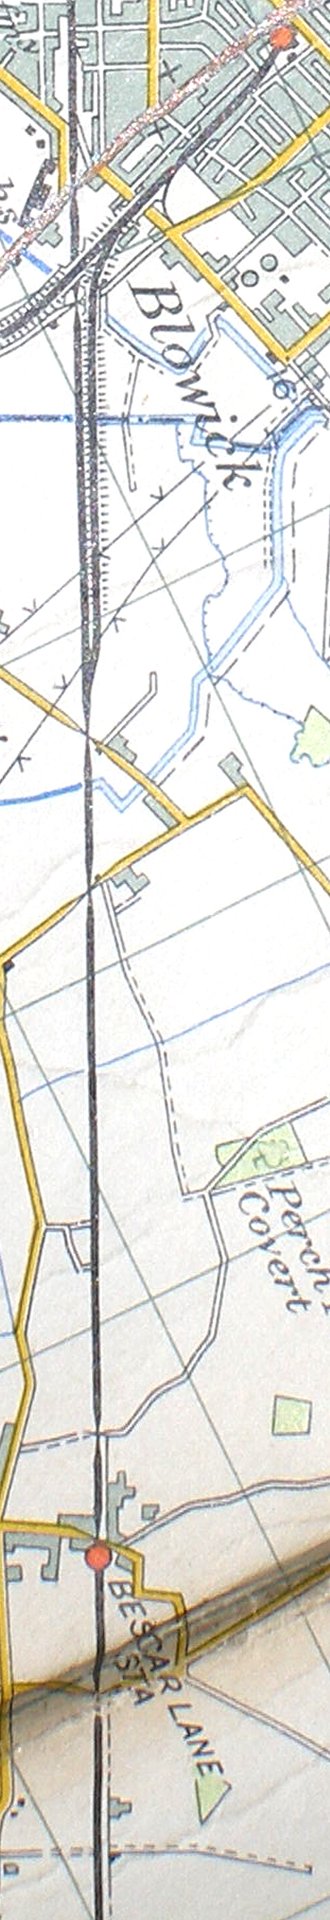 Section of Ordnance Survey Map 1961 showing railway line from Meols Cop to Bescar Lane